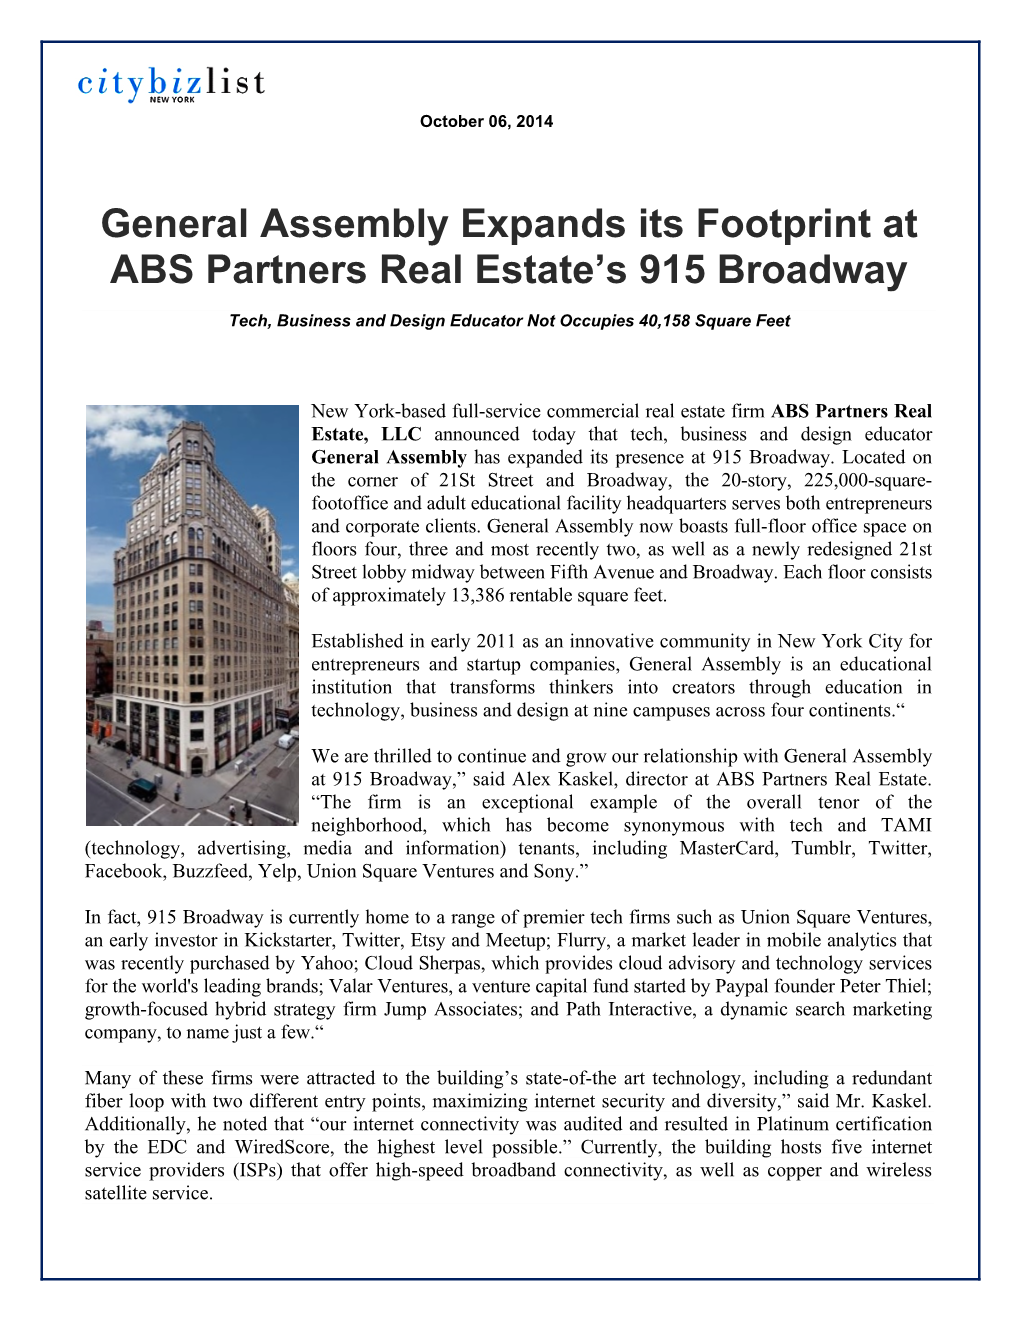 General Assembly Expands Its Footprint at ABS Partners Real Estate’S 915 Broadway